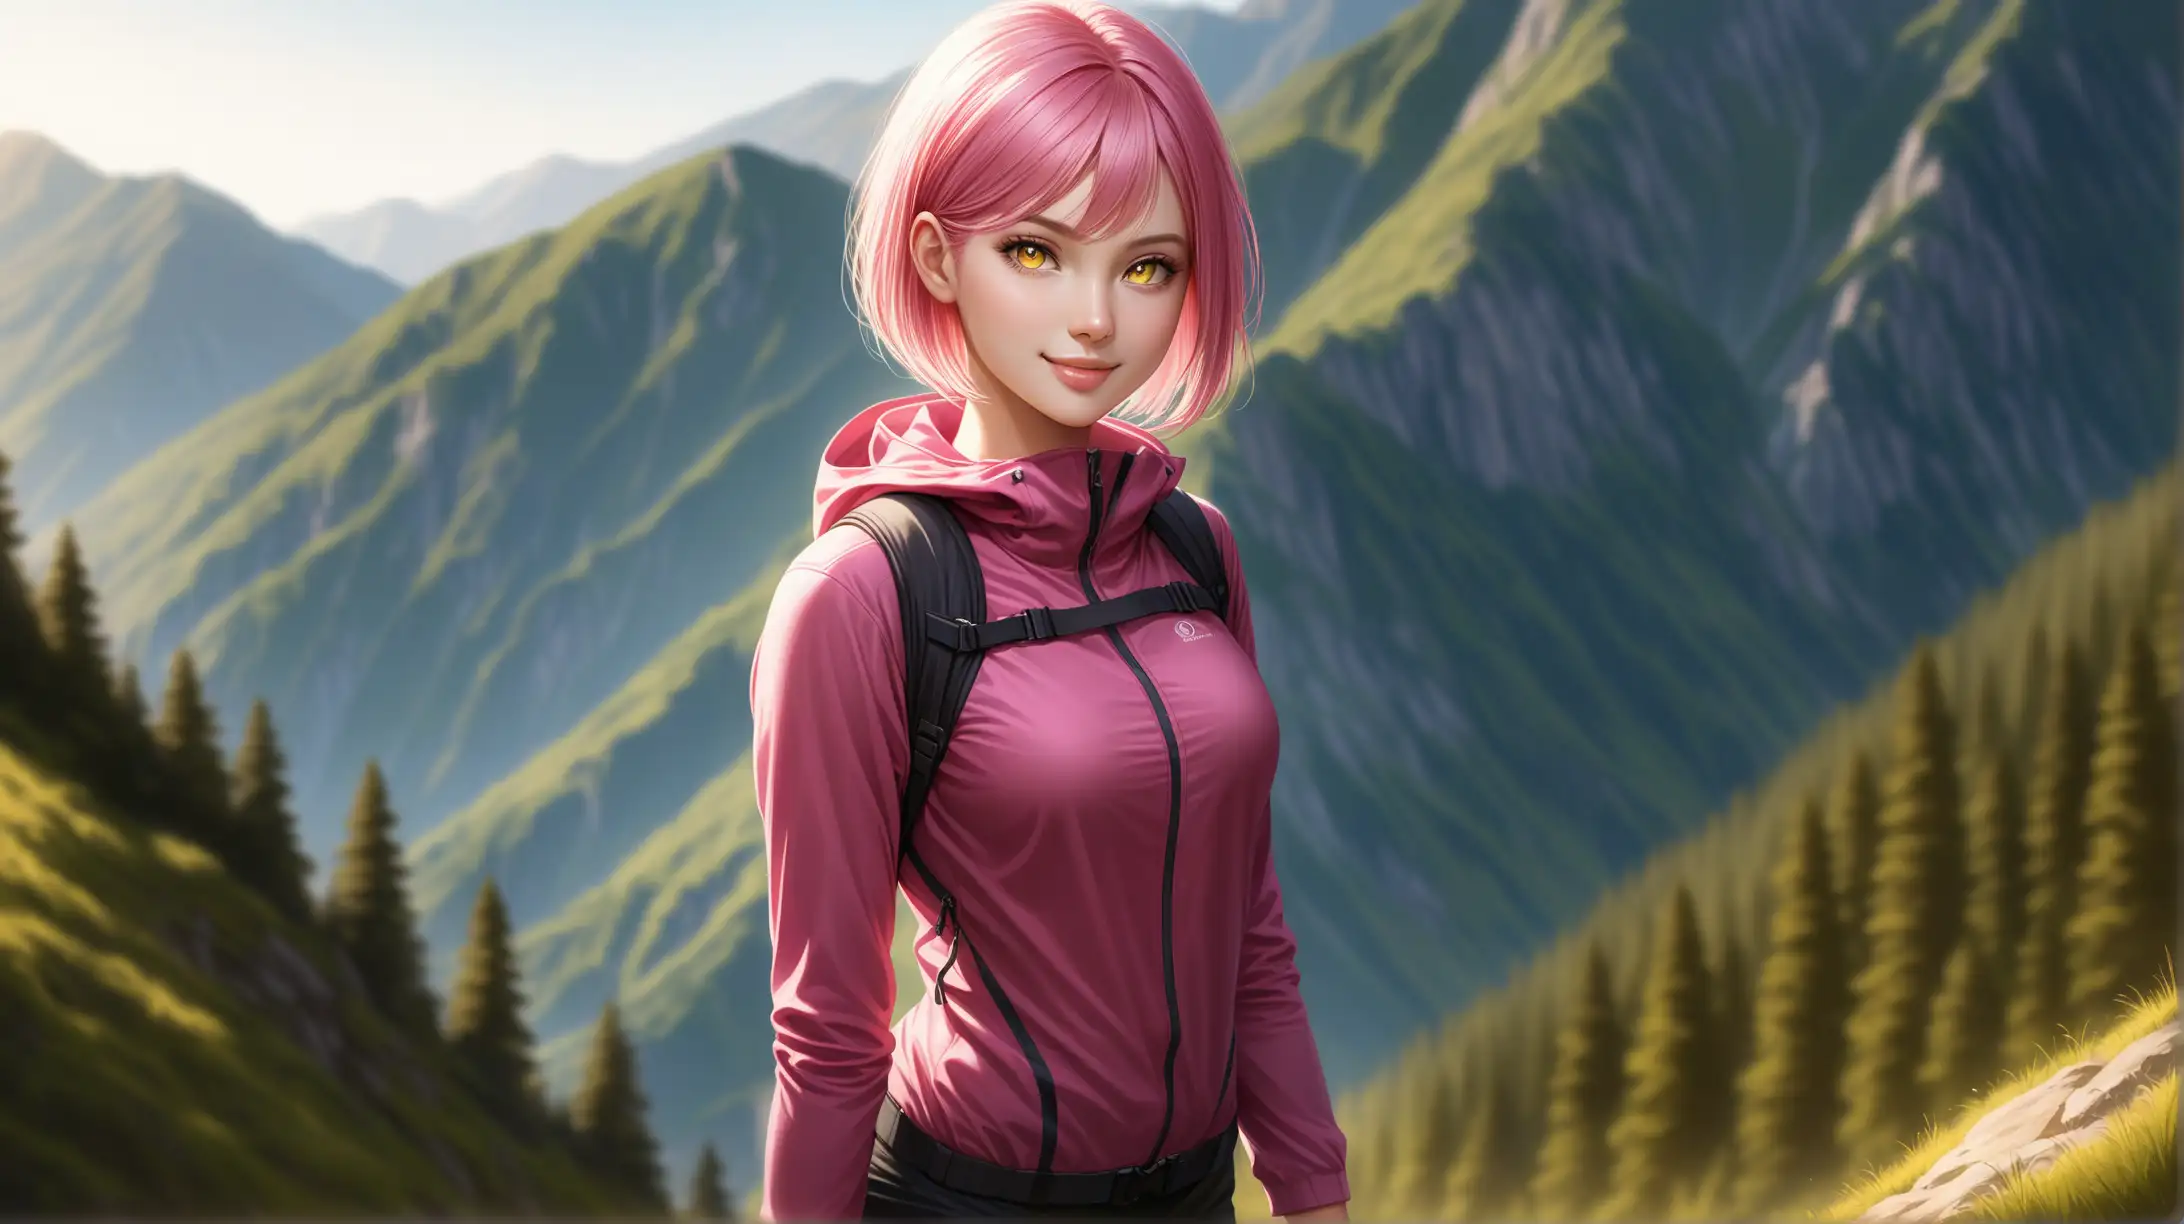 Draw a woman, short pink hair, yellow ringed eyes, slender figure, high quality, realistic, accurate, detailed, long shot, outdoors, dim lighting, hiking outfit, seductive pose, smiling toward viewer